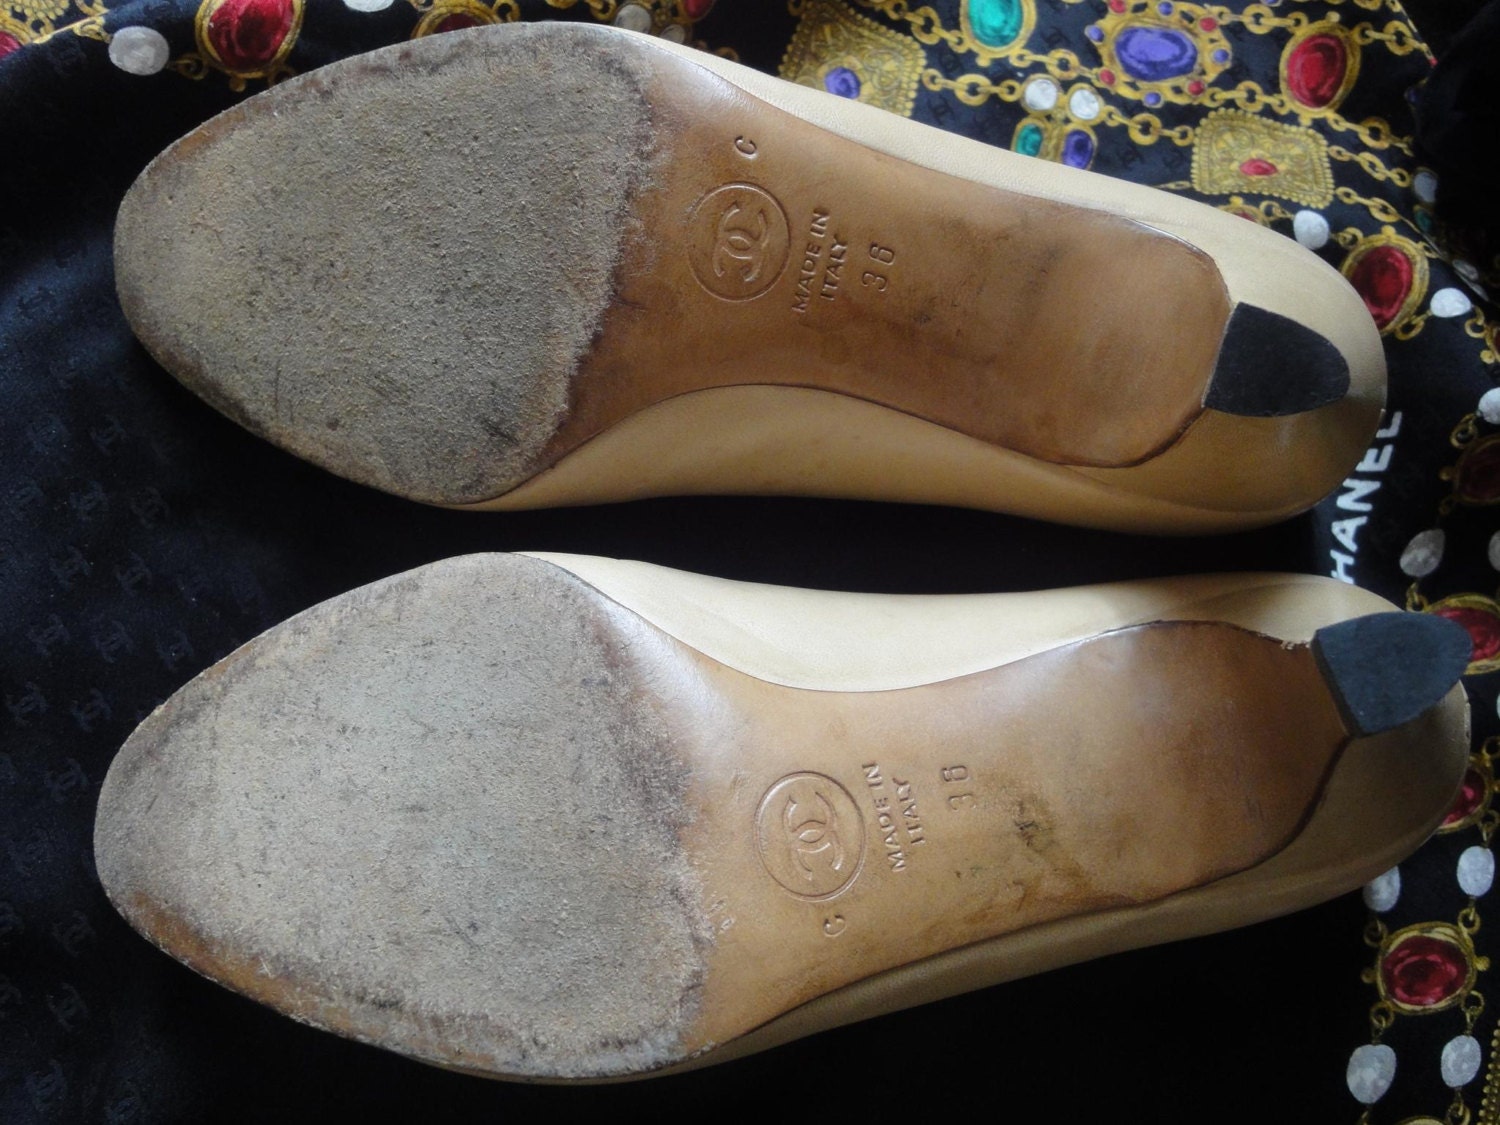 Vintage CHANEL Beige and Black Leather Shoes Classic Pumps. -  Israel